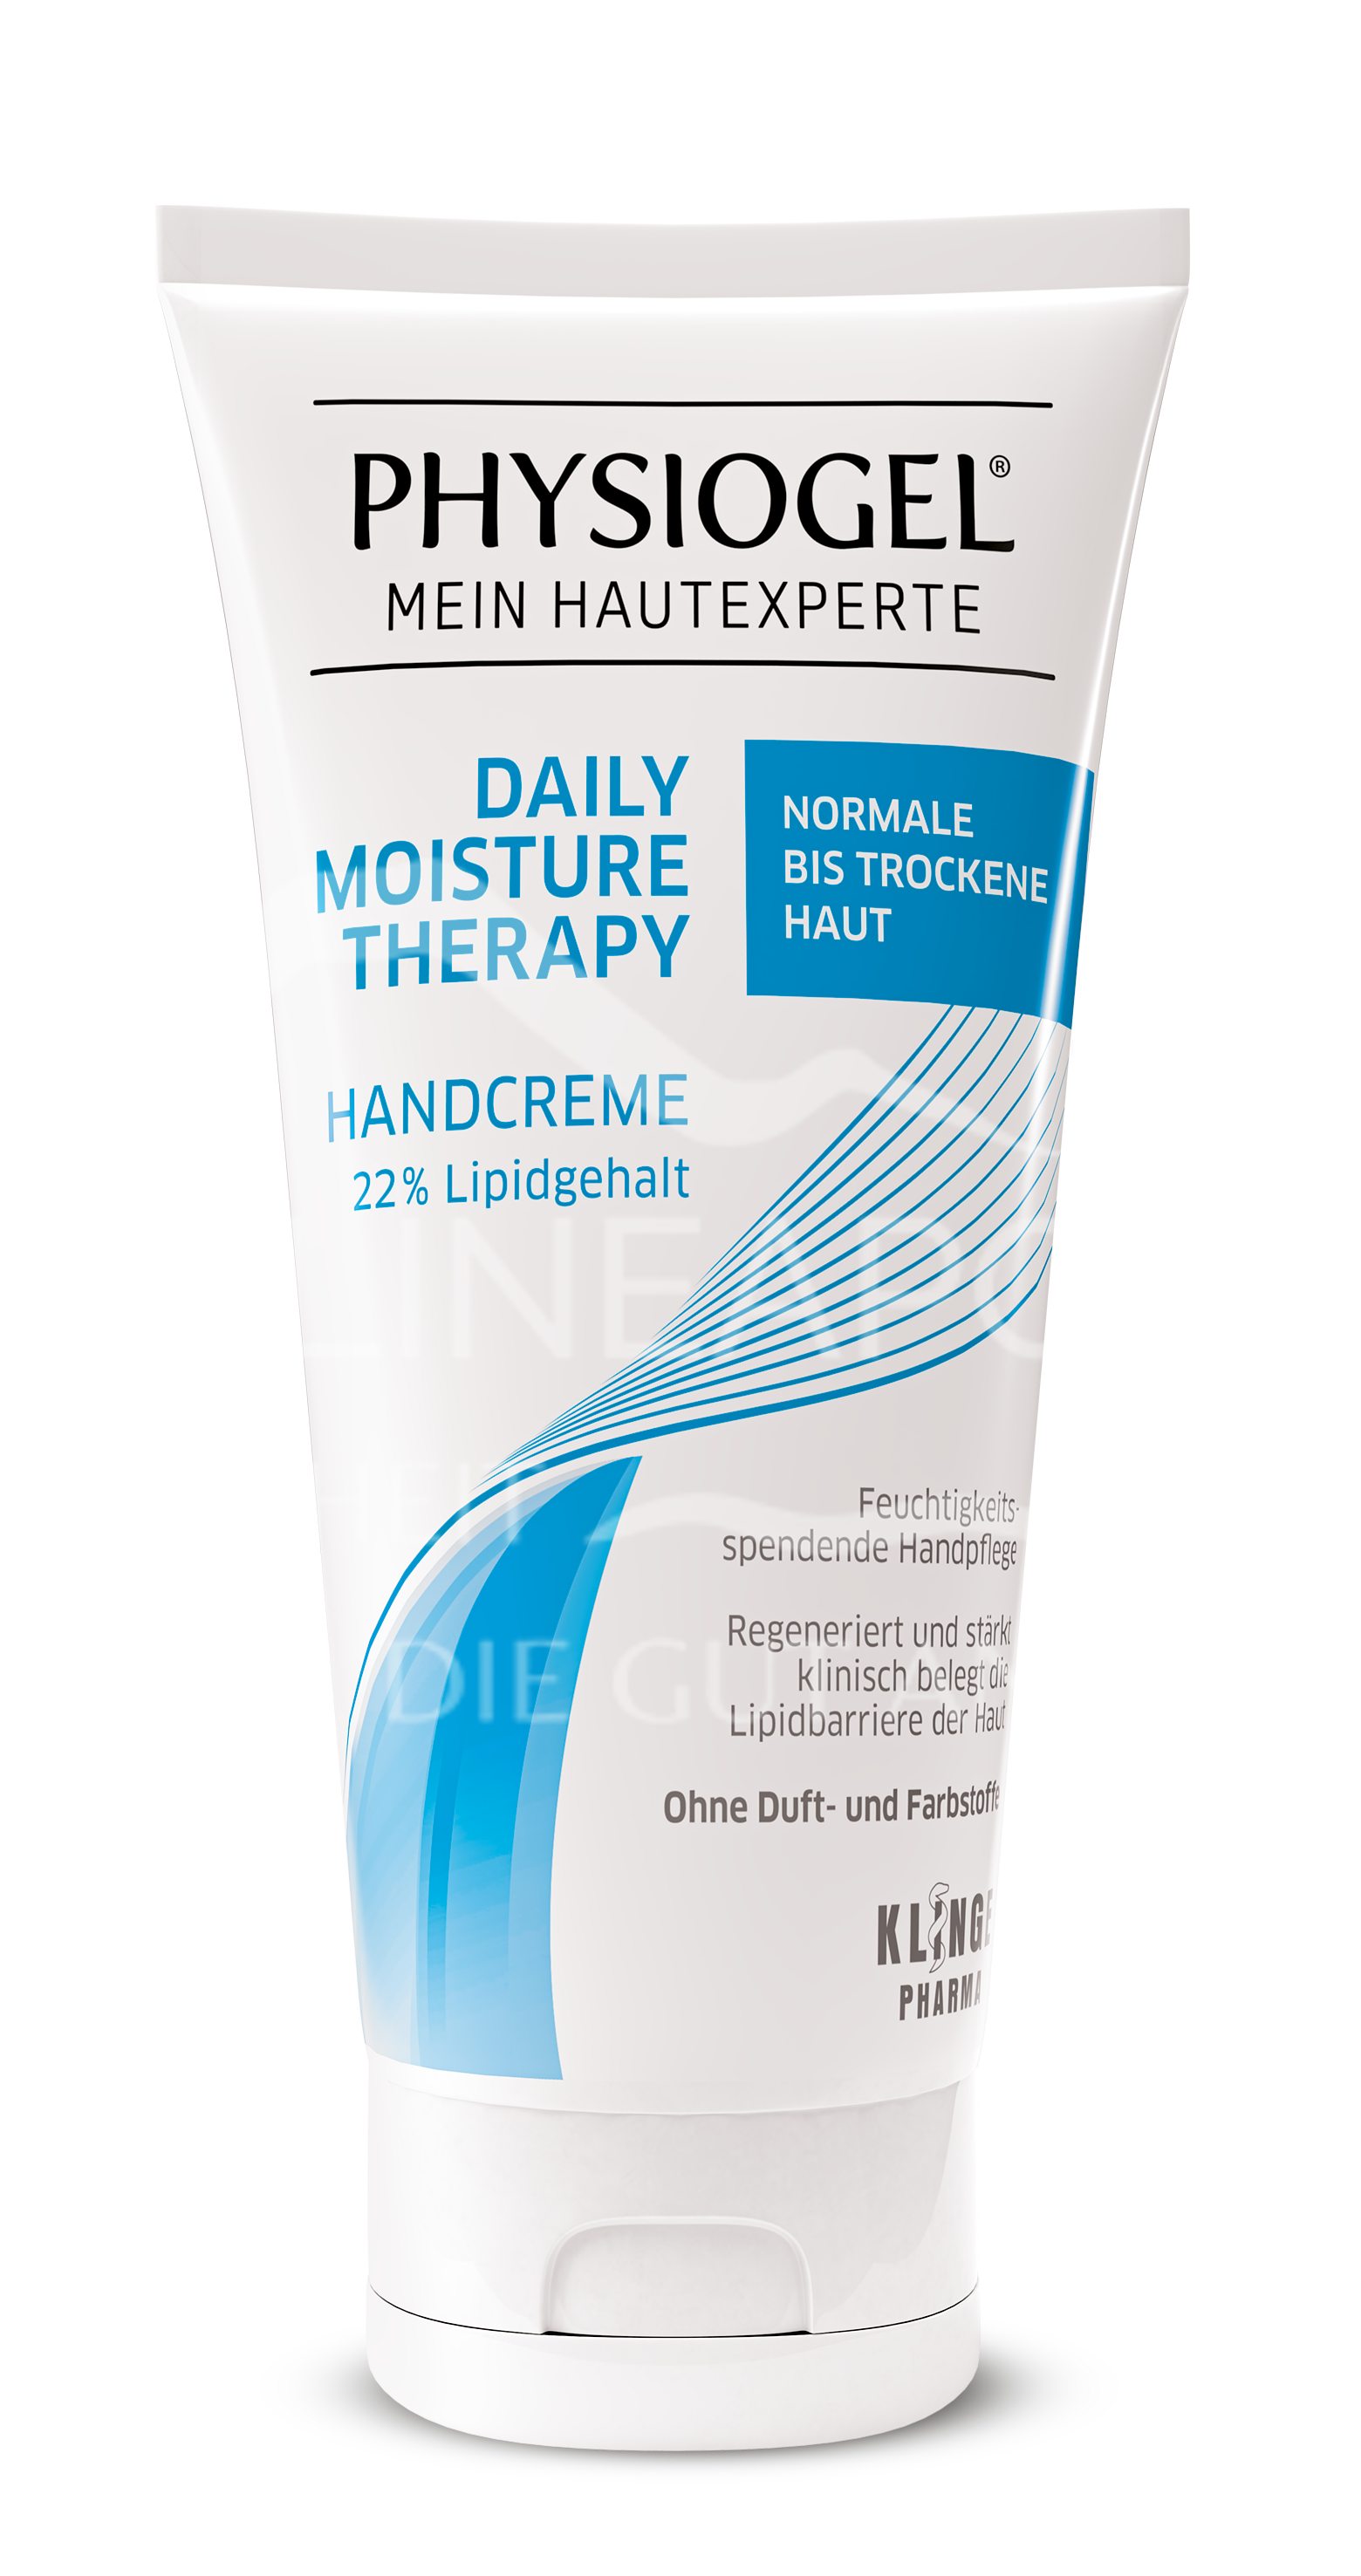 Physiogel® Daily Moisture Therapy Handcreme - Normale bis trockene Haut